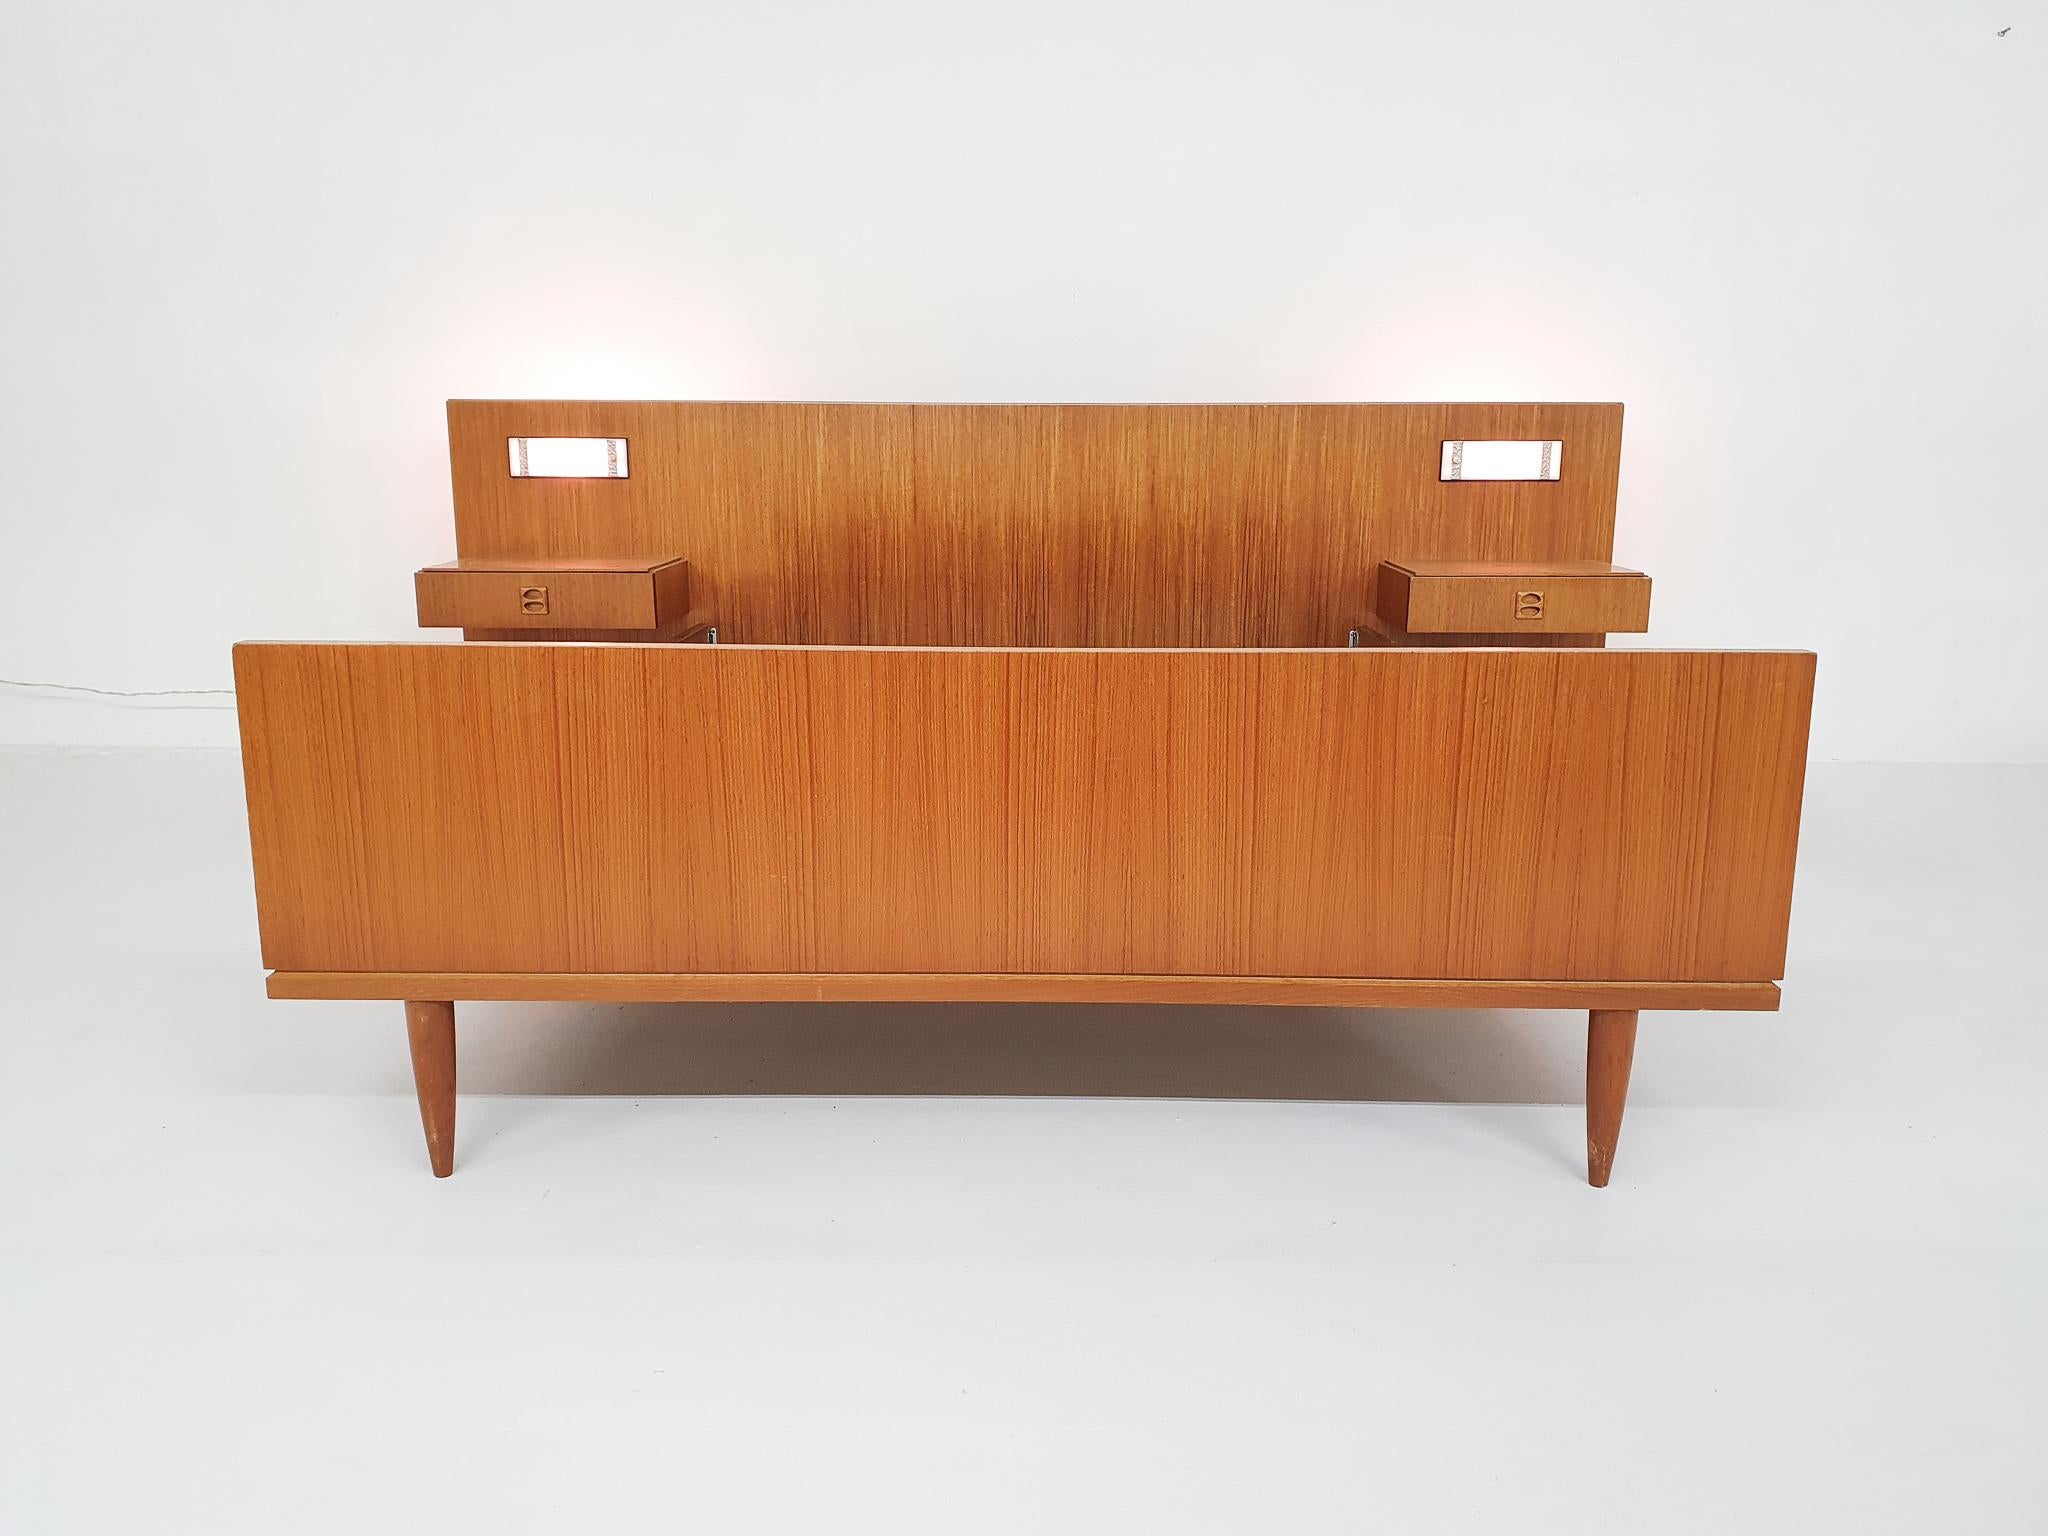 Teak bed 140 x 200 cm, with a teak headboard with integrated nightstand and bed side lamps.
Headboard is 250 cm wide.